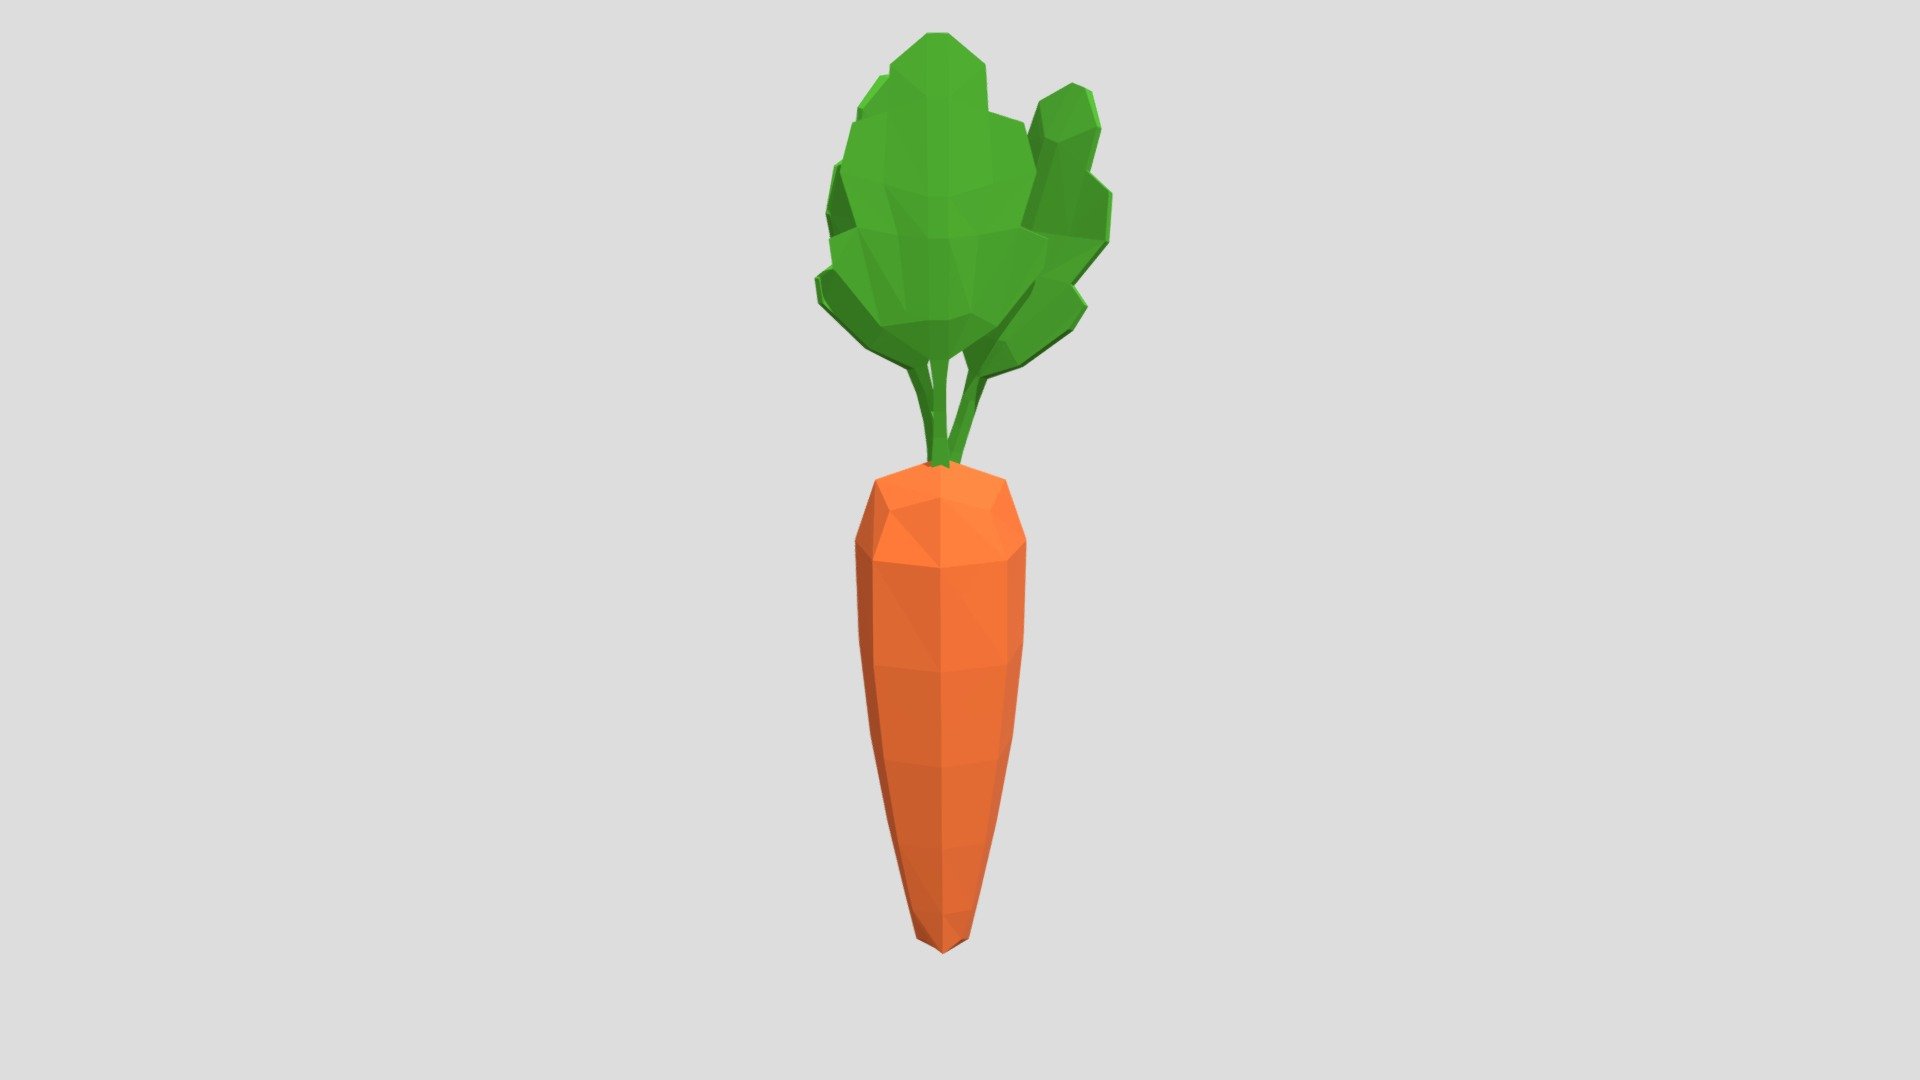 This is a backup of a Poly Asset named Carrot. Saved from Poly by Google. Preview may be without textures, they are still in the Download ZIP with a preview thumbnail 3d model